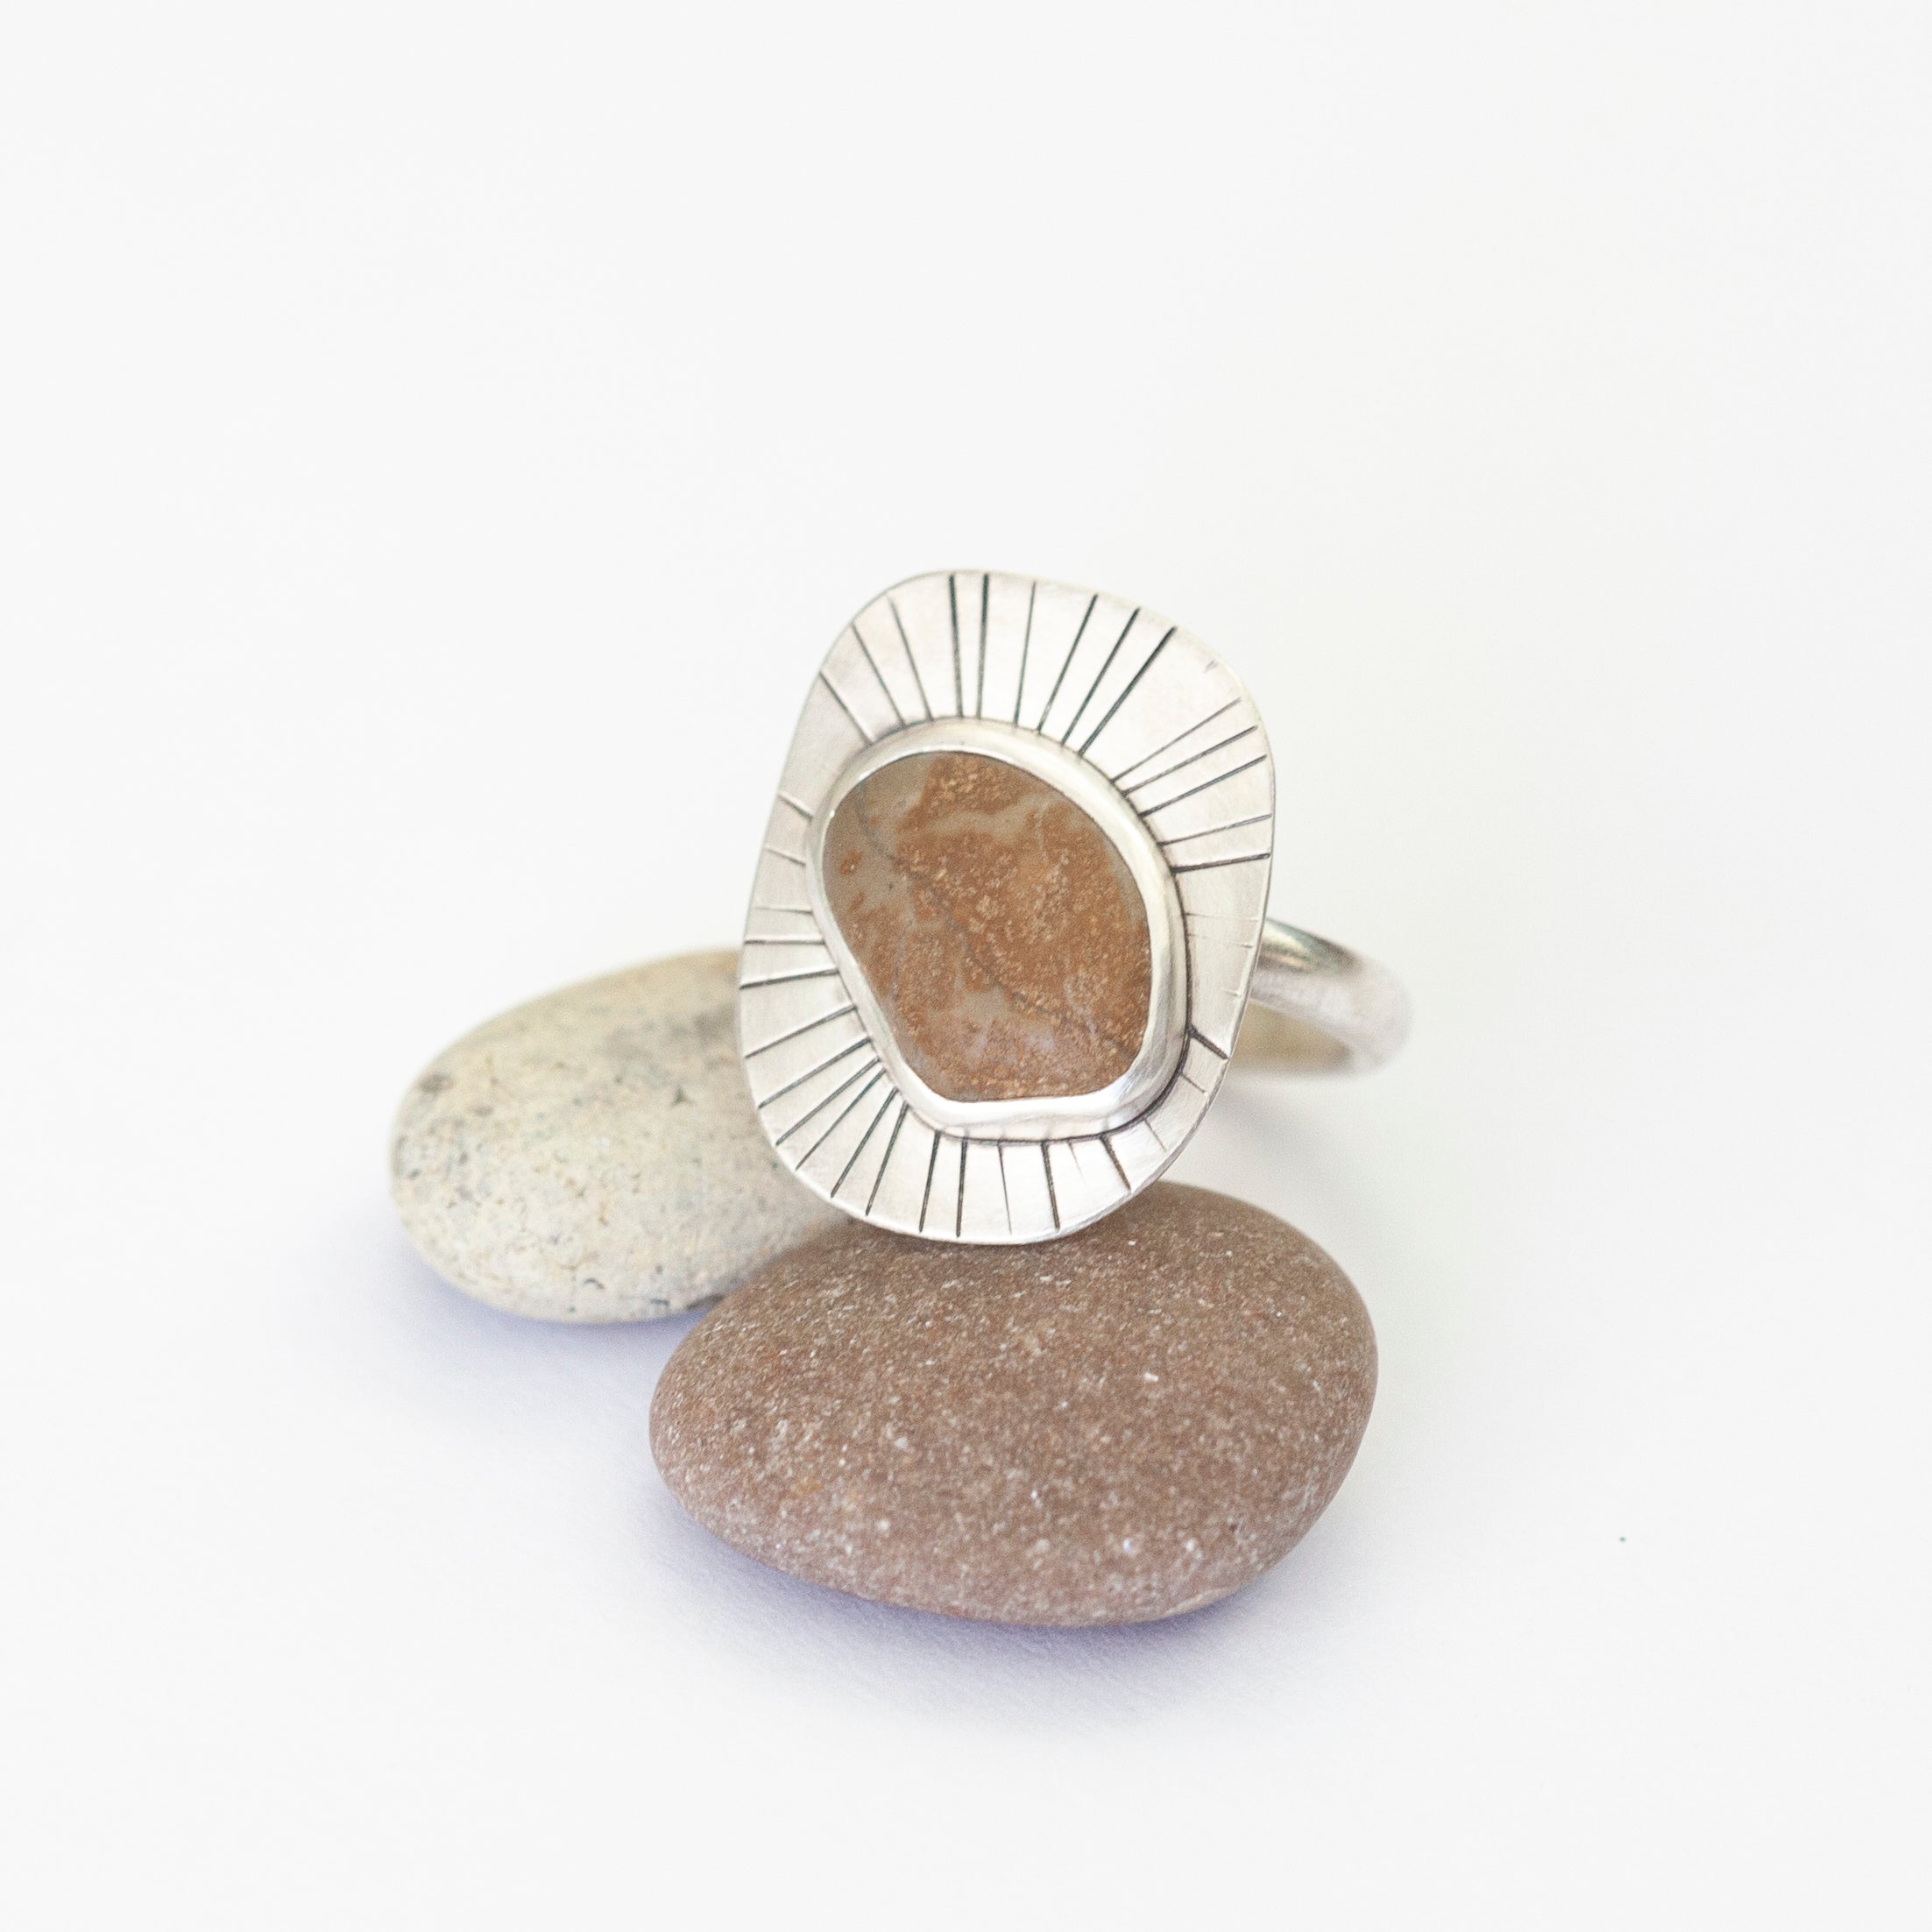 OOAK intuition ring with brown pebble ~ Size 53 (ready-to-ship)